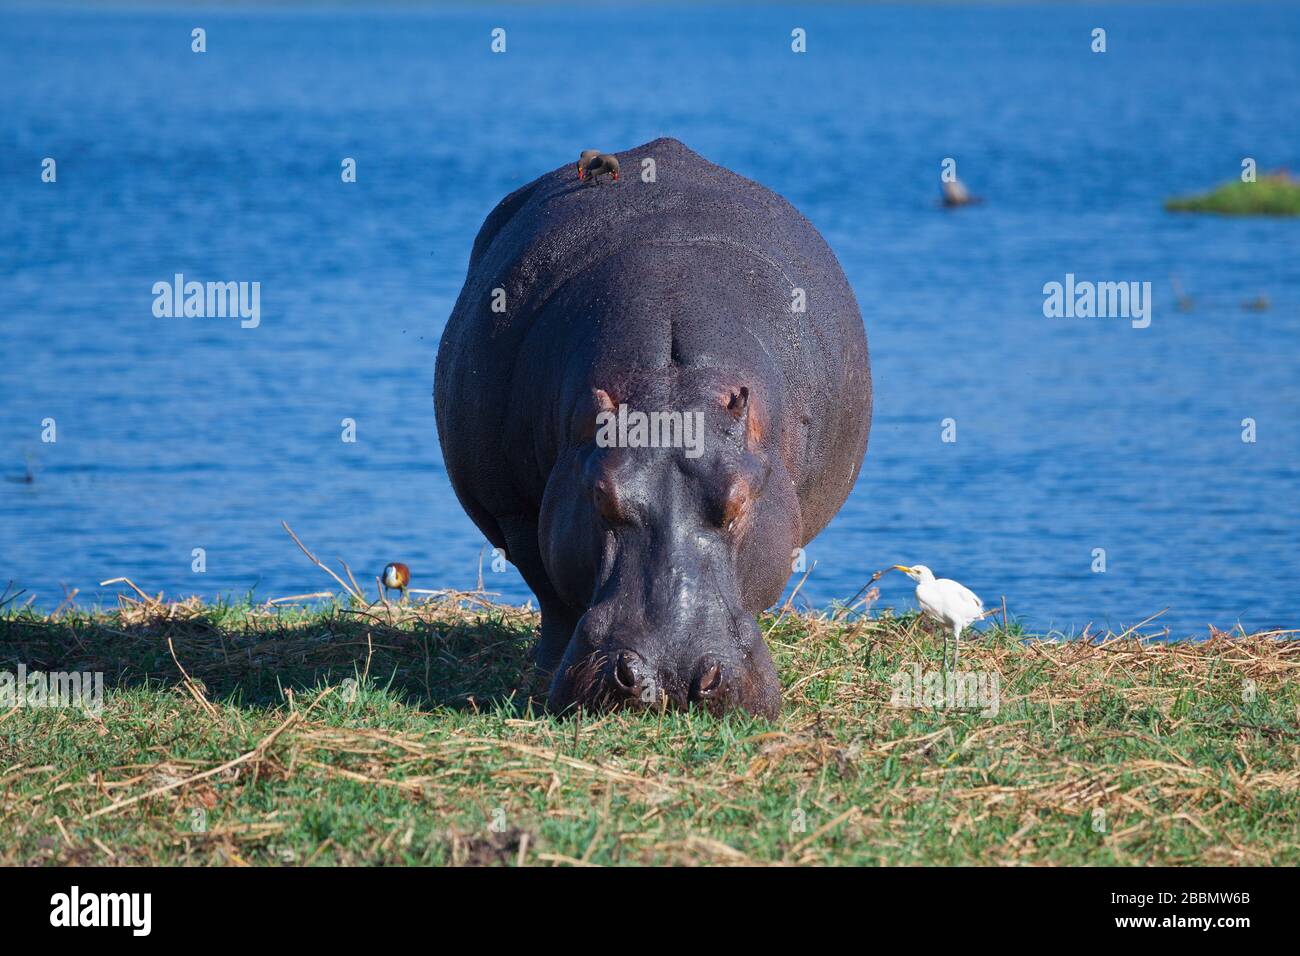 Browsing hippo in front of blue water Stock Photo